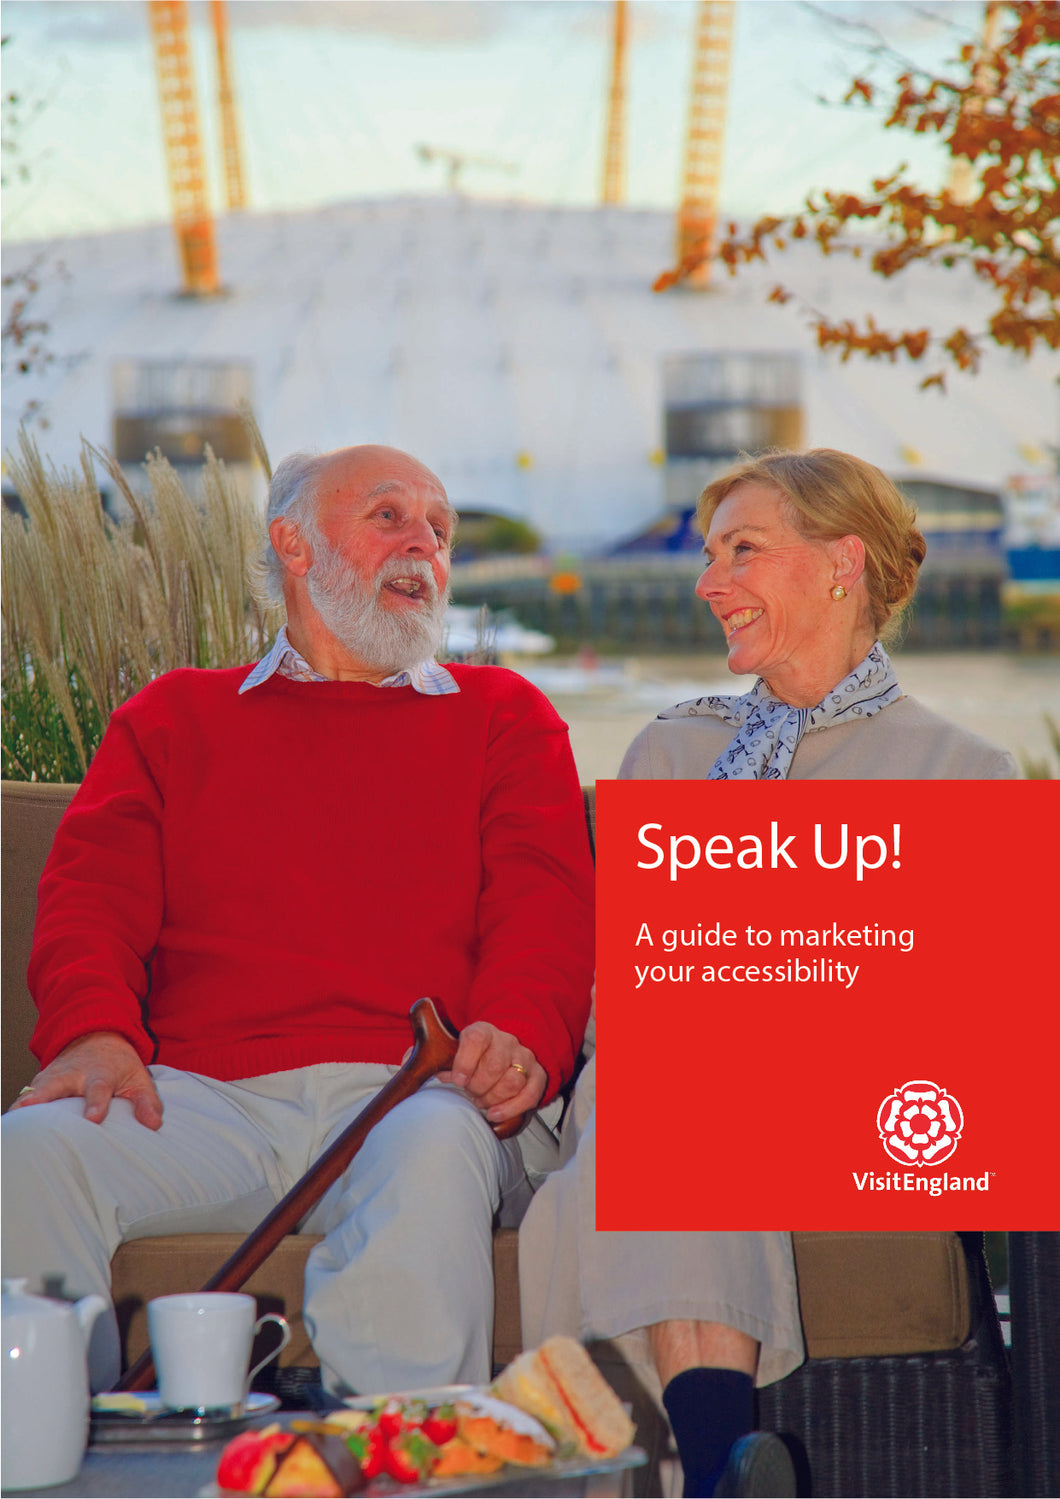 Portada Guía: Speak up a guide for marketing your accessibility